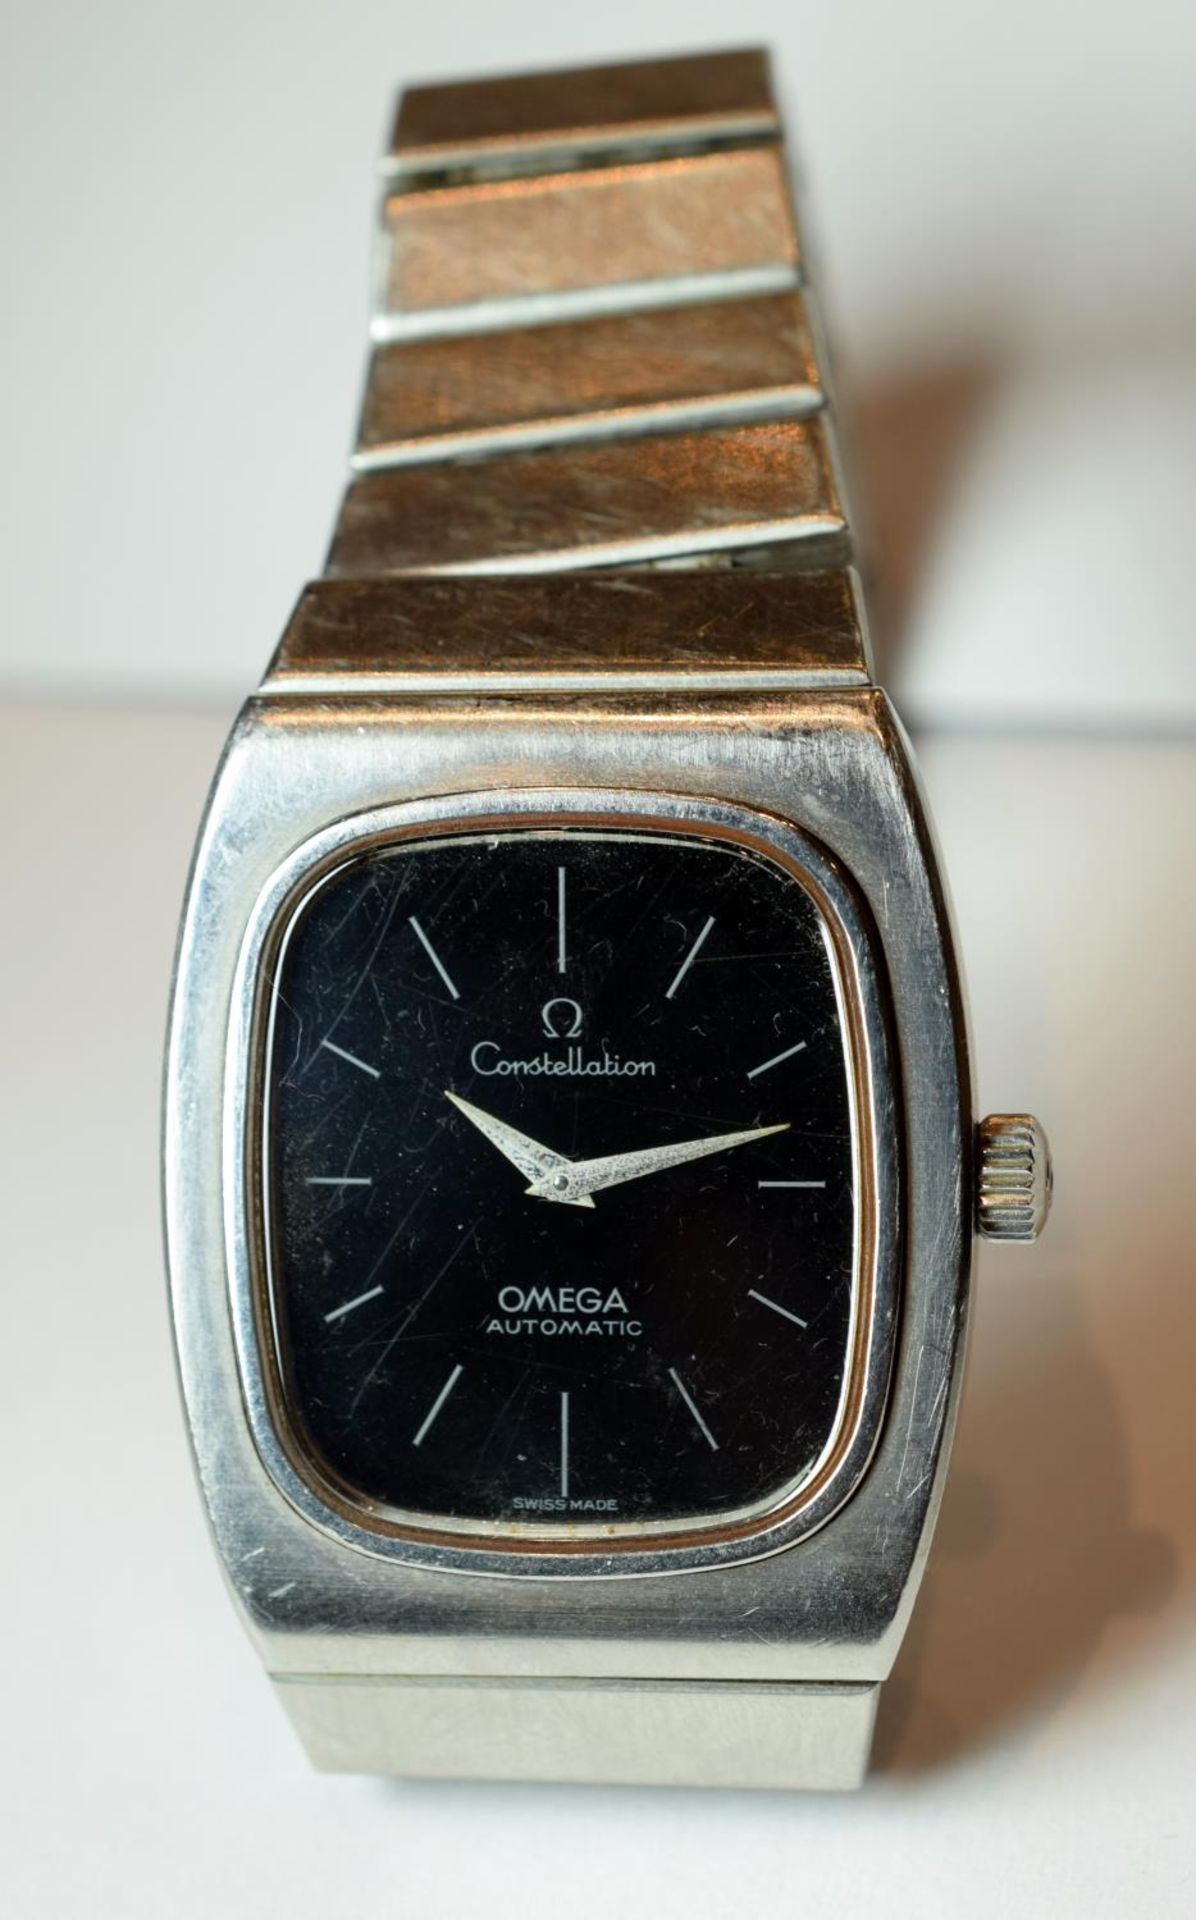 Omega Constellation In Stainless Steel Rectangular Dial - Image 2 of 5